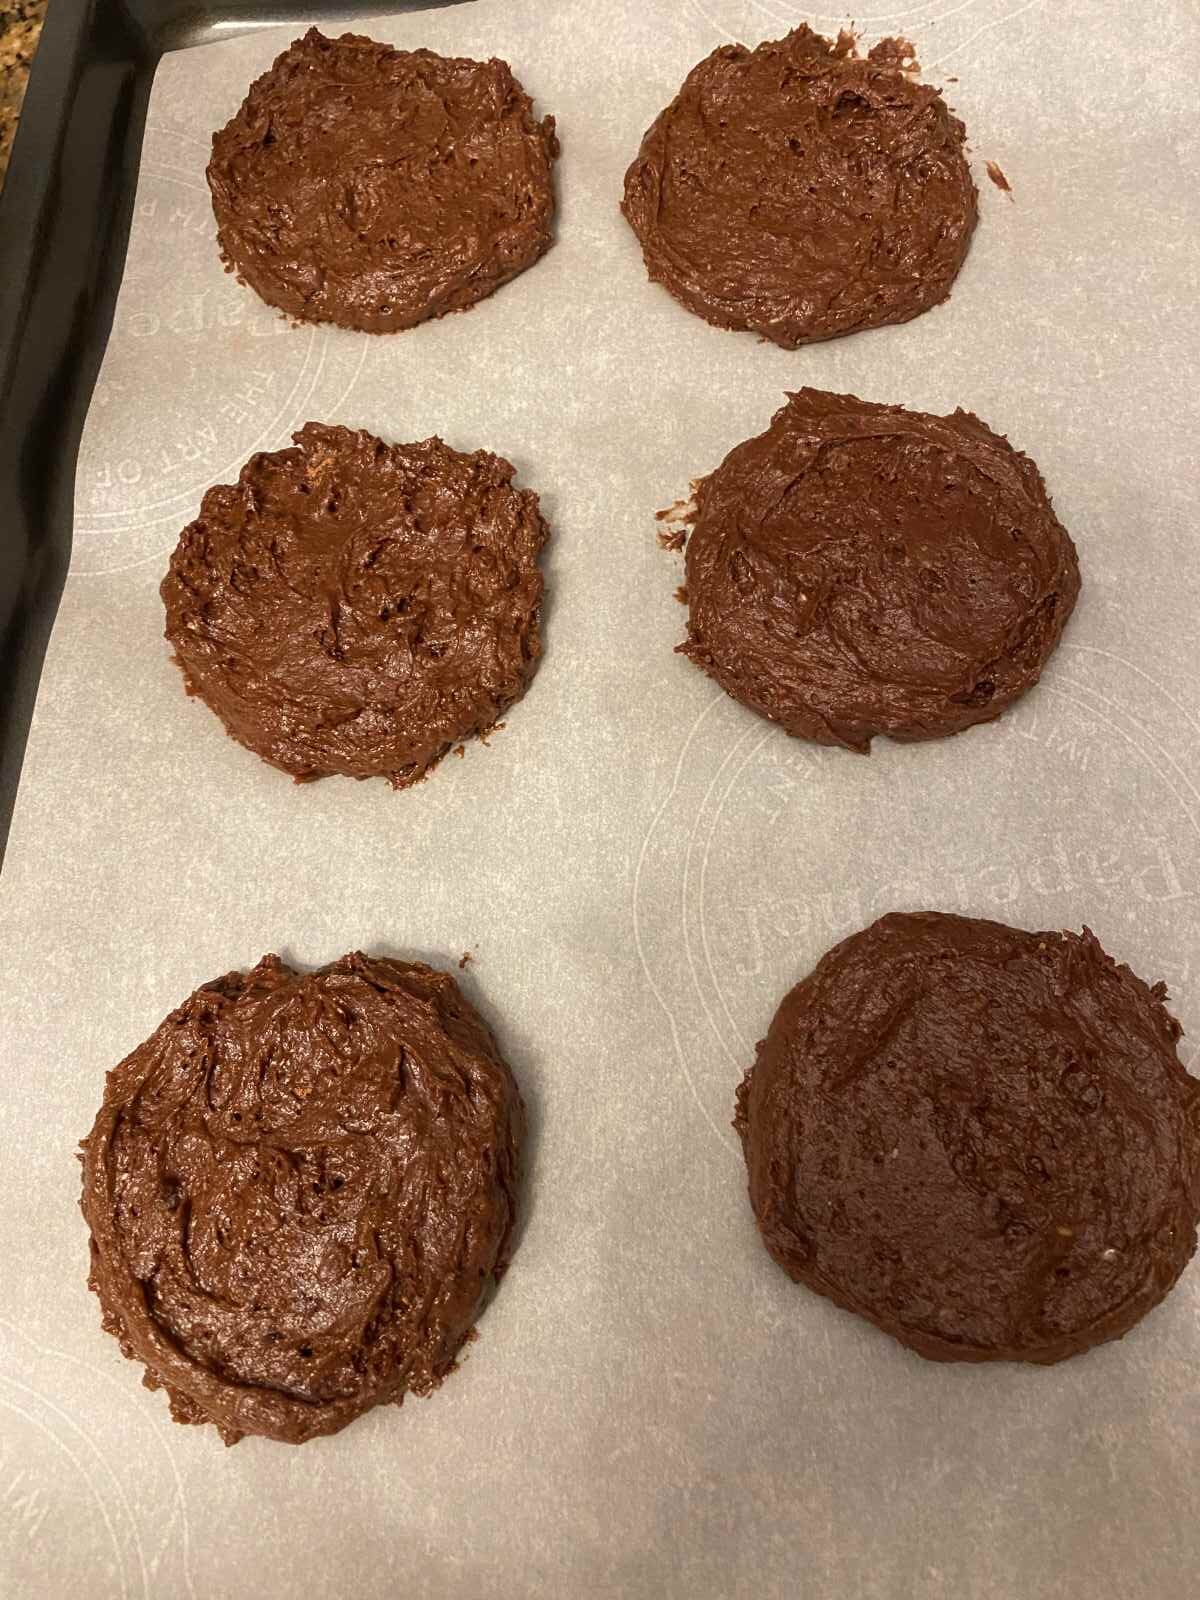 uncooked chocolate cake cookies on a baking tray